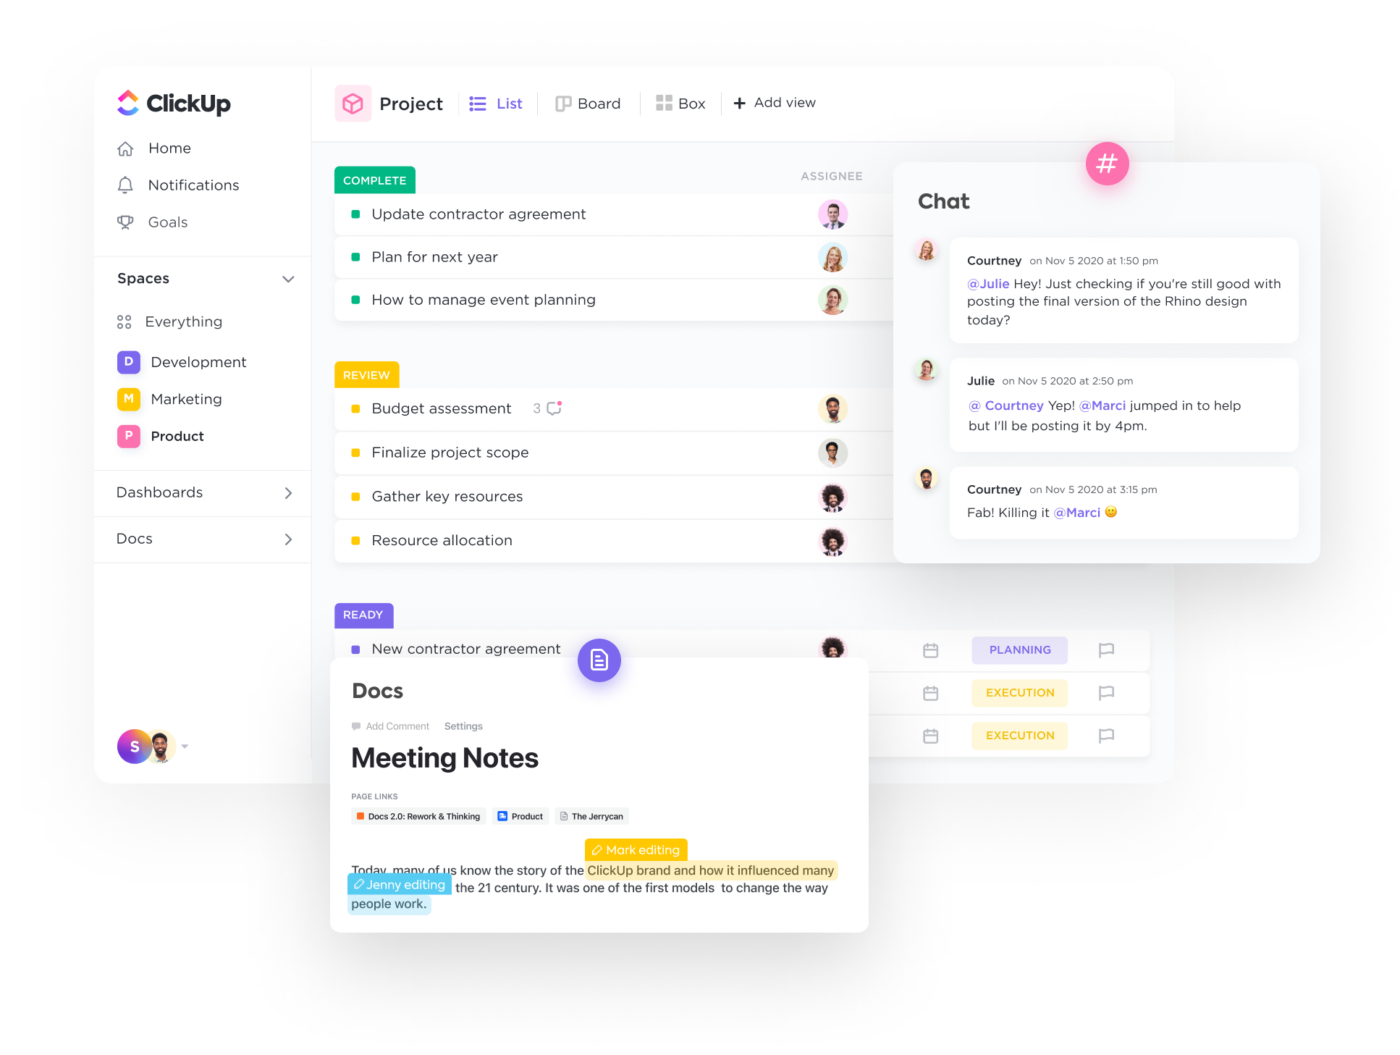 ClickUp Docs, Chat view, and List view